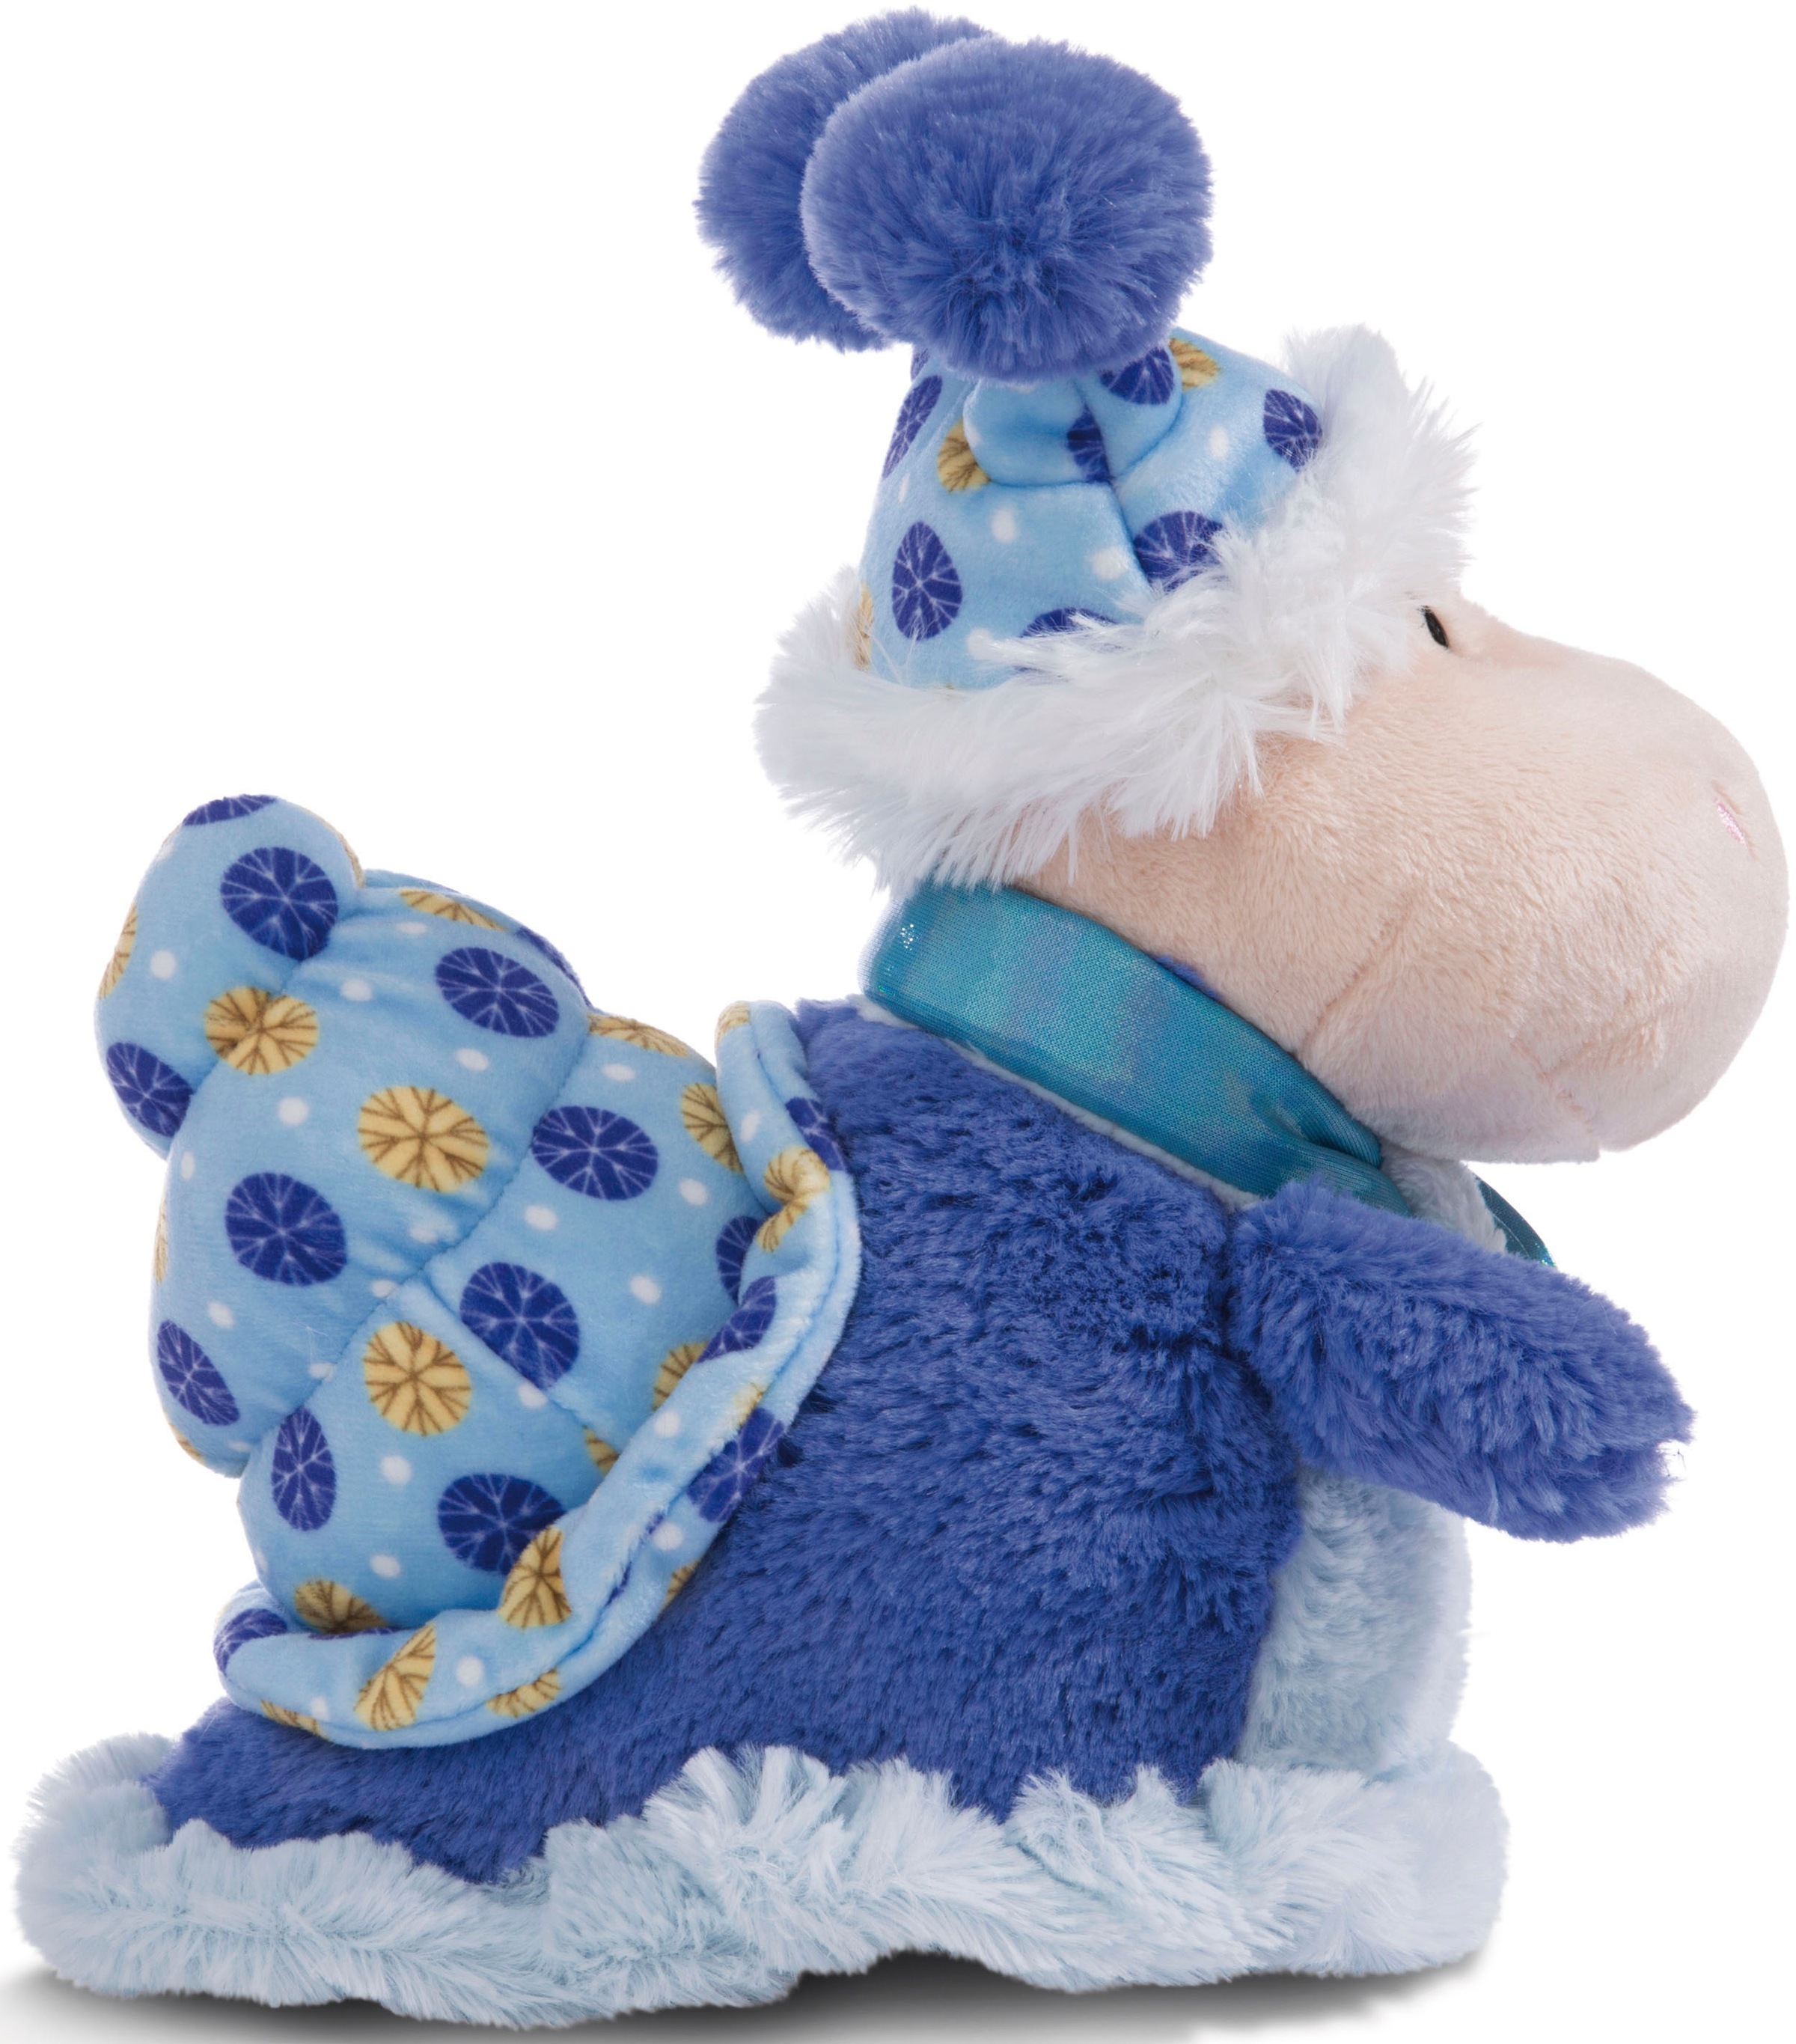 Nici Kuscheltier »Cosy Winter, Schnecke Sille, 50 cm«, enthält recyceltes Material (Global Recycled Standard)